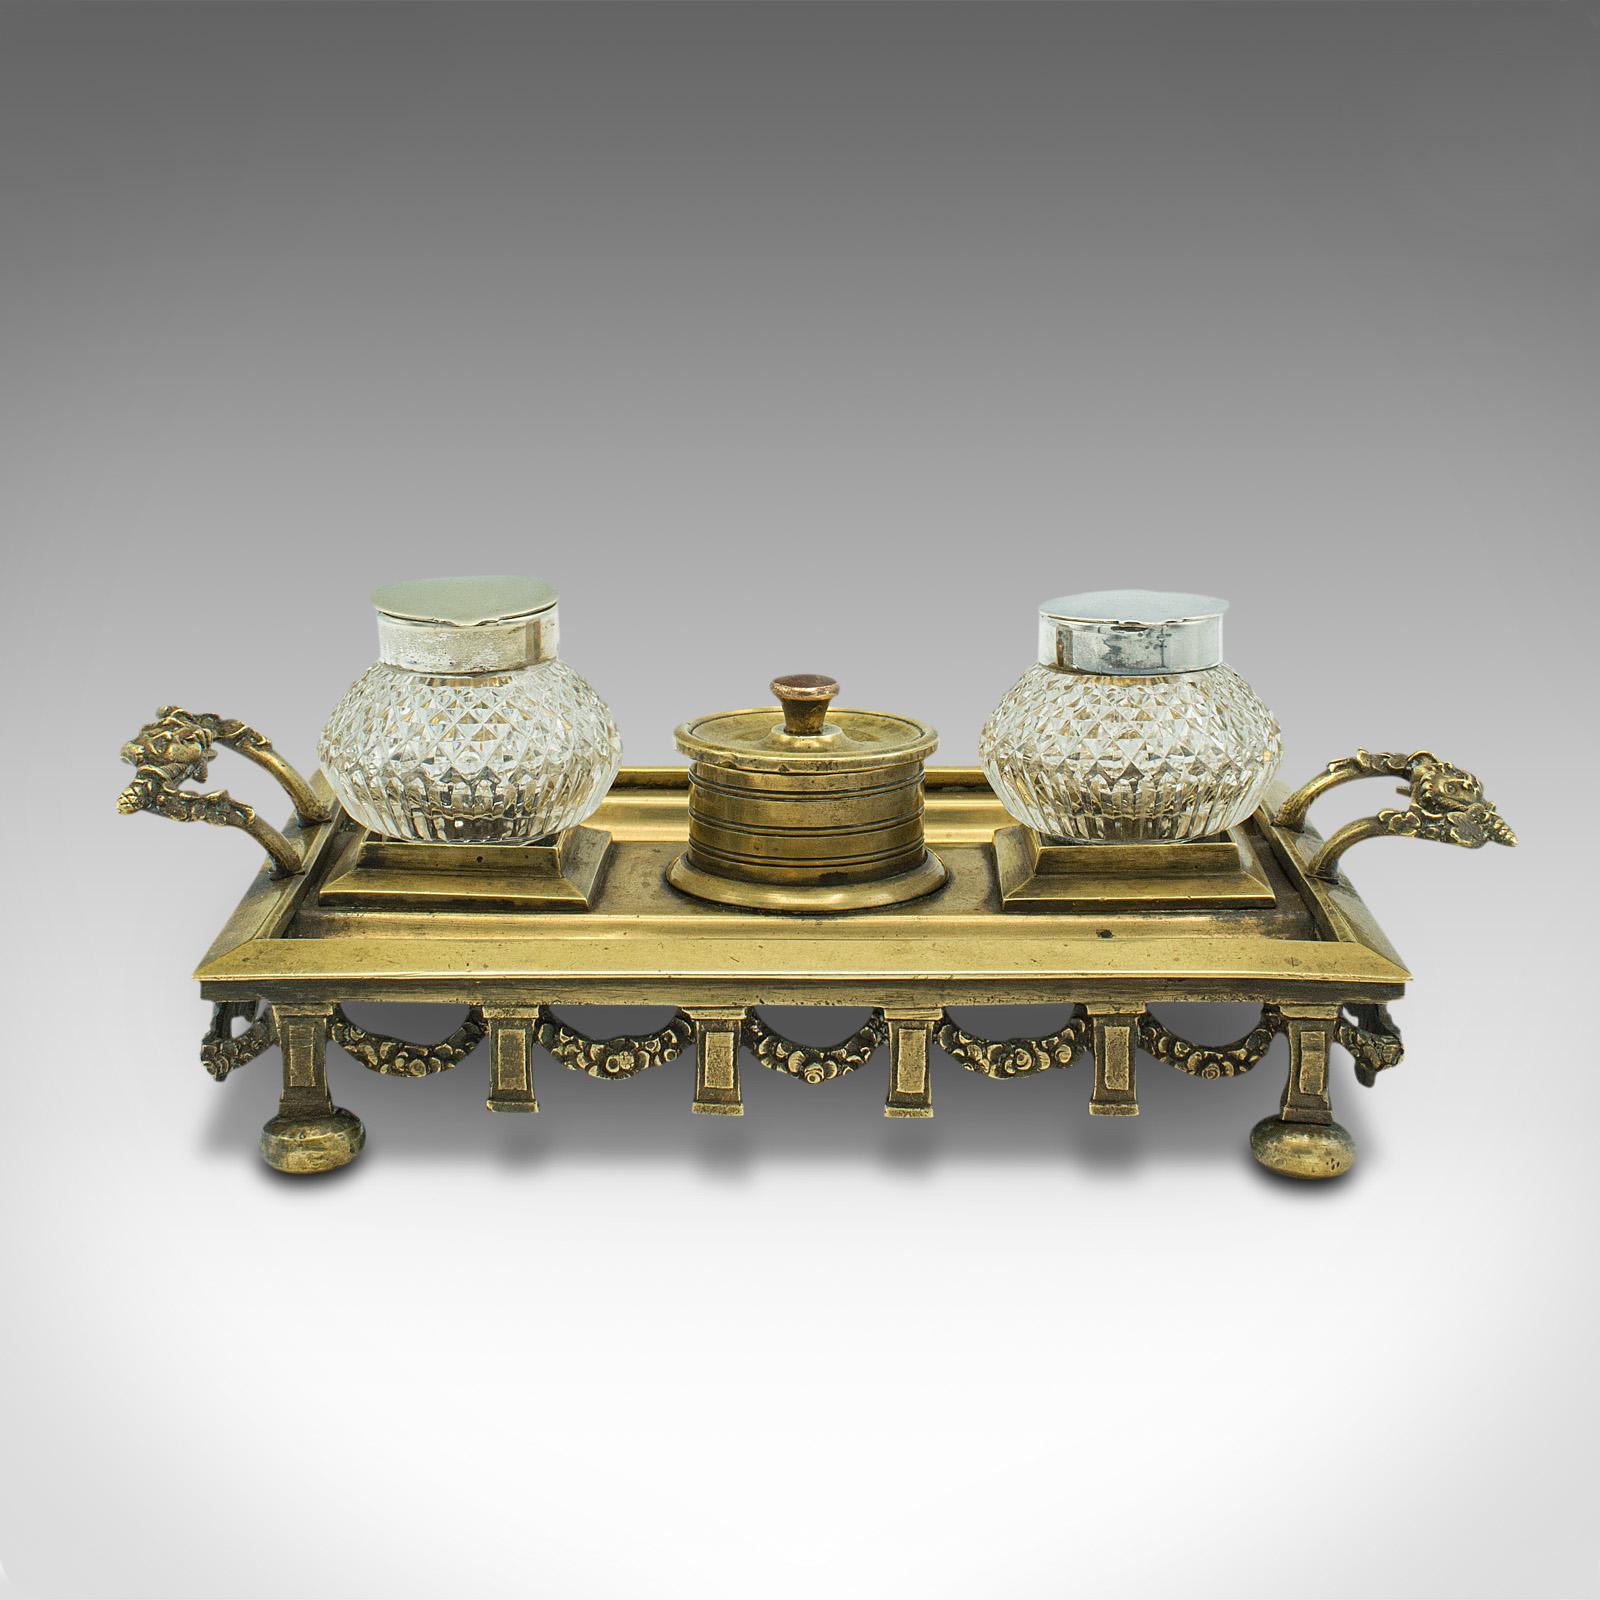 This is an antique pen tray. An English, brass and silver plated inkwell stand, dating to the Edwardian period and later, circa 1910.

Compact and neat, with appealing tonality
Displays a desirable aged patina and in good order
Brass presents